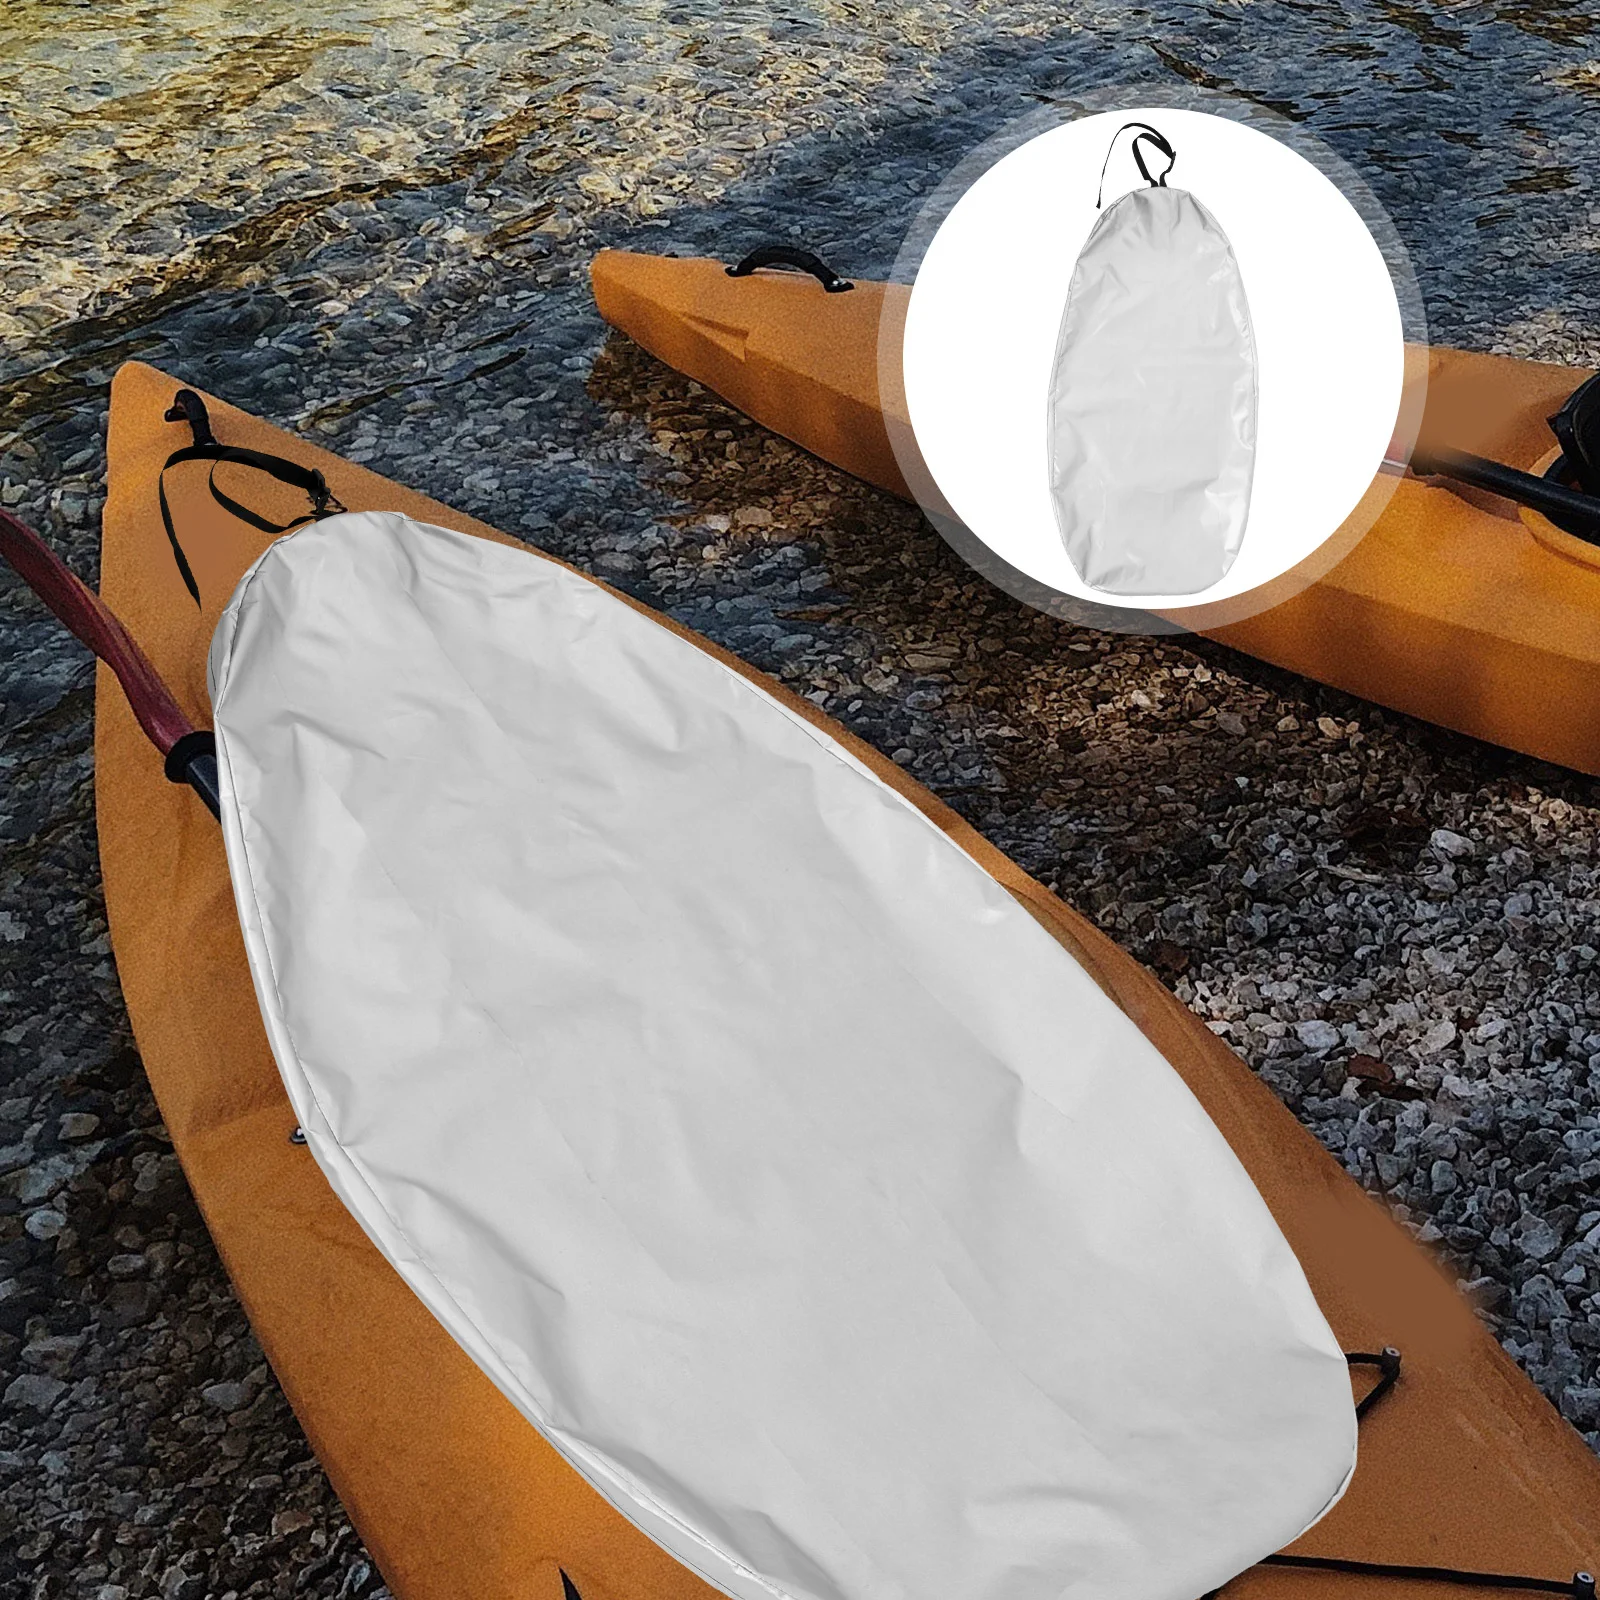 

Kayak Canopy Covers for Outdoor Storage Protective Case Seat Canoe Bag 420 Oxford Cloth Silver-coated Fabric Block Shield